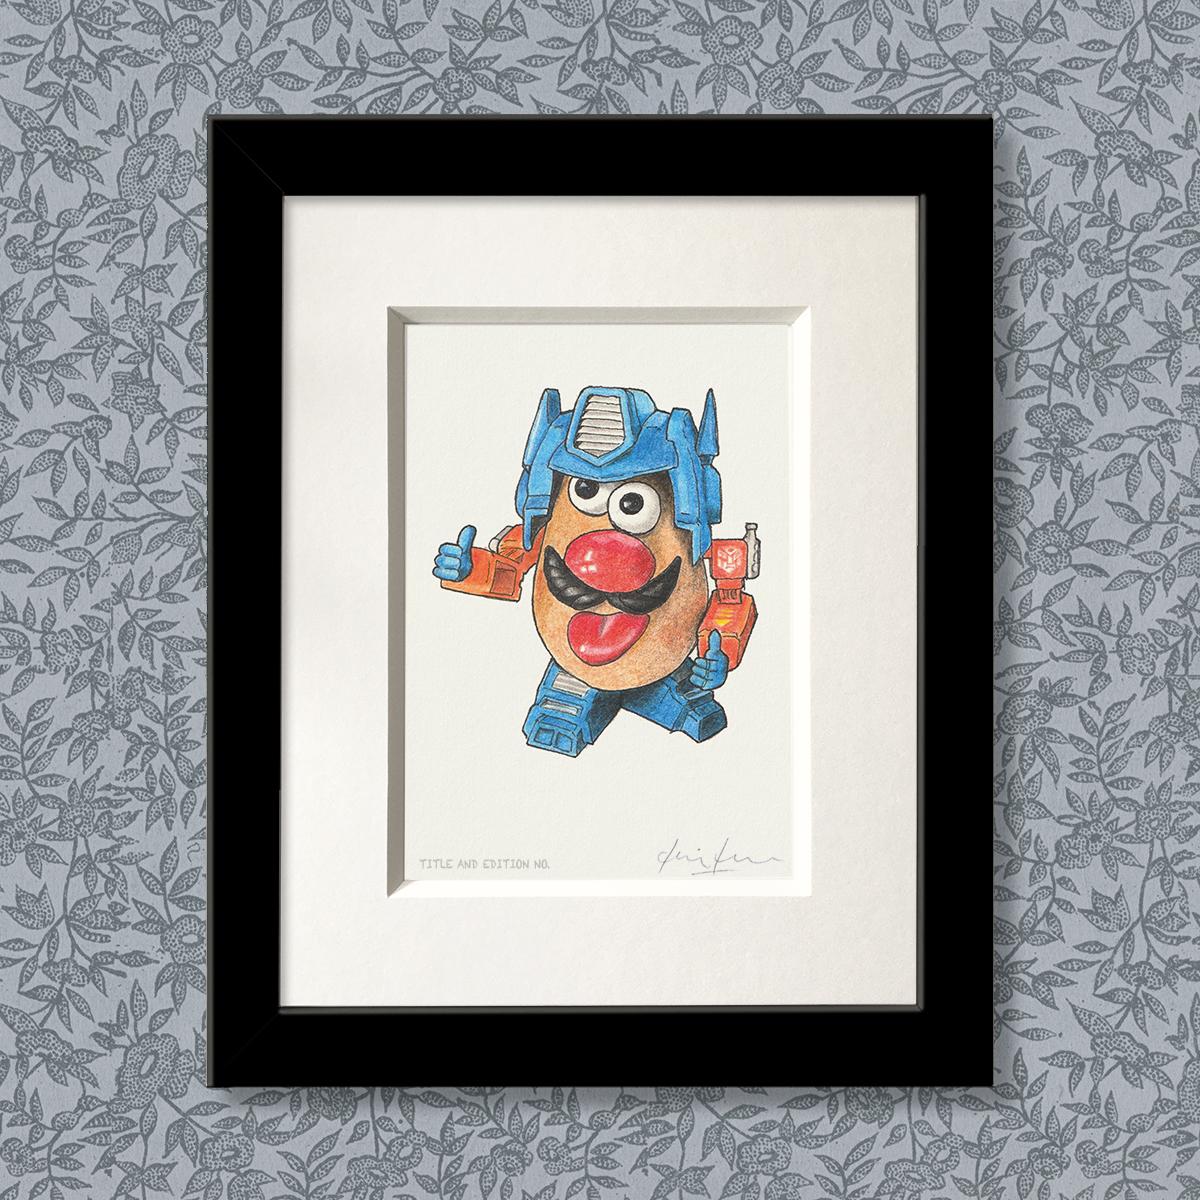 Limited edition print from a pen, ink and coloured pencil drawing of the Mr Potatohead toy dressed as Optimus Prime in a black frame